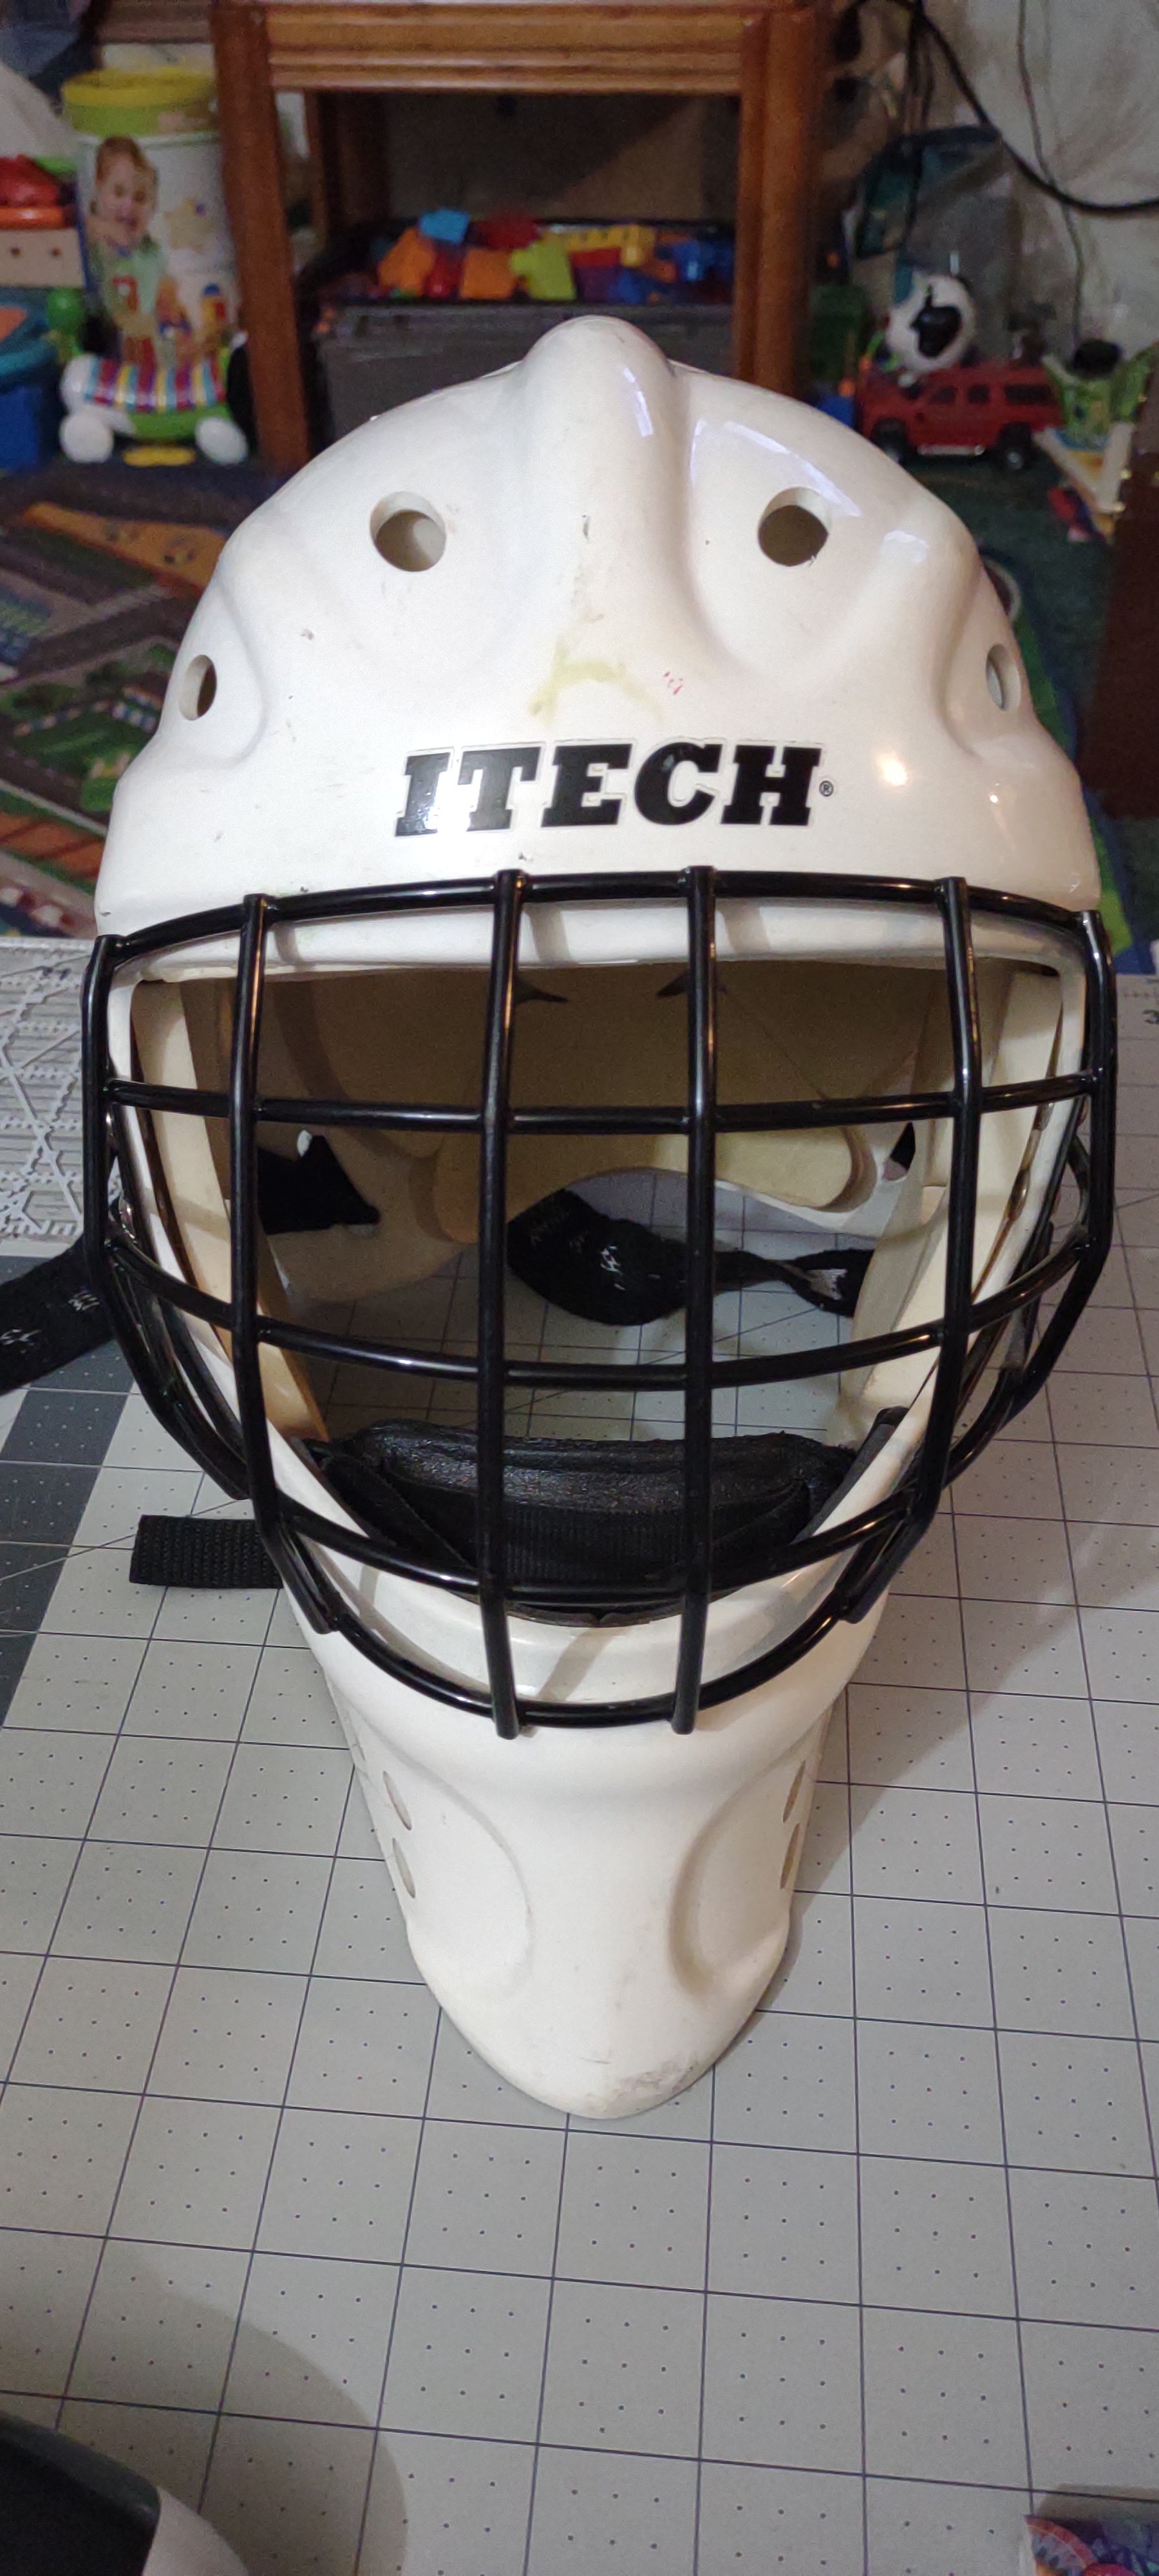 New Itech Pro Envy 7 Ice hockey Goalie Mask Small Fit 1 helmet straight bar cage 